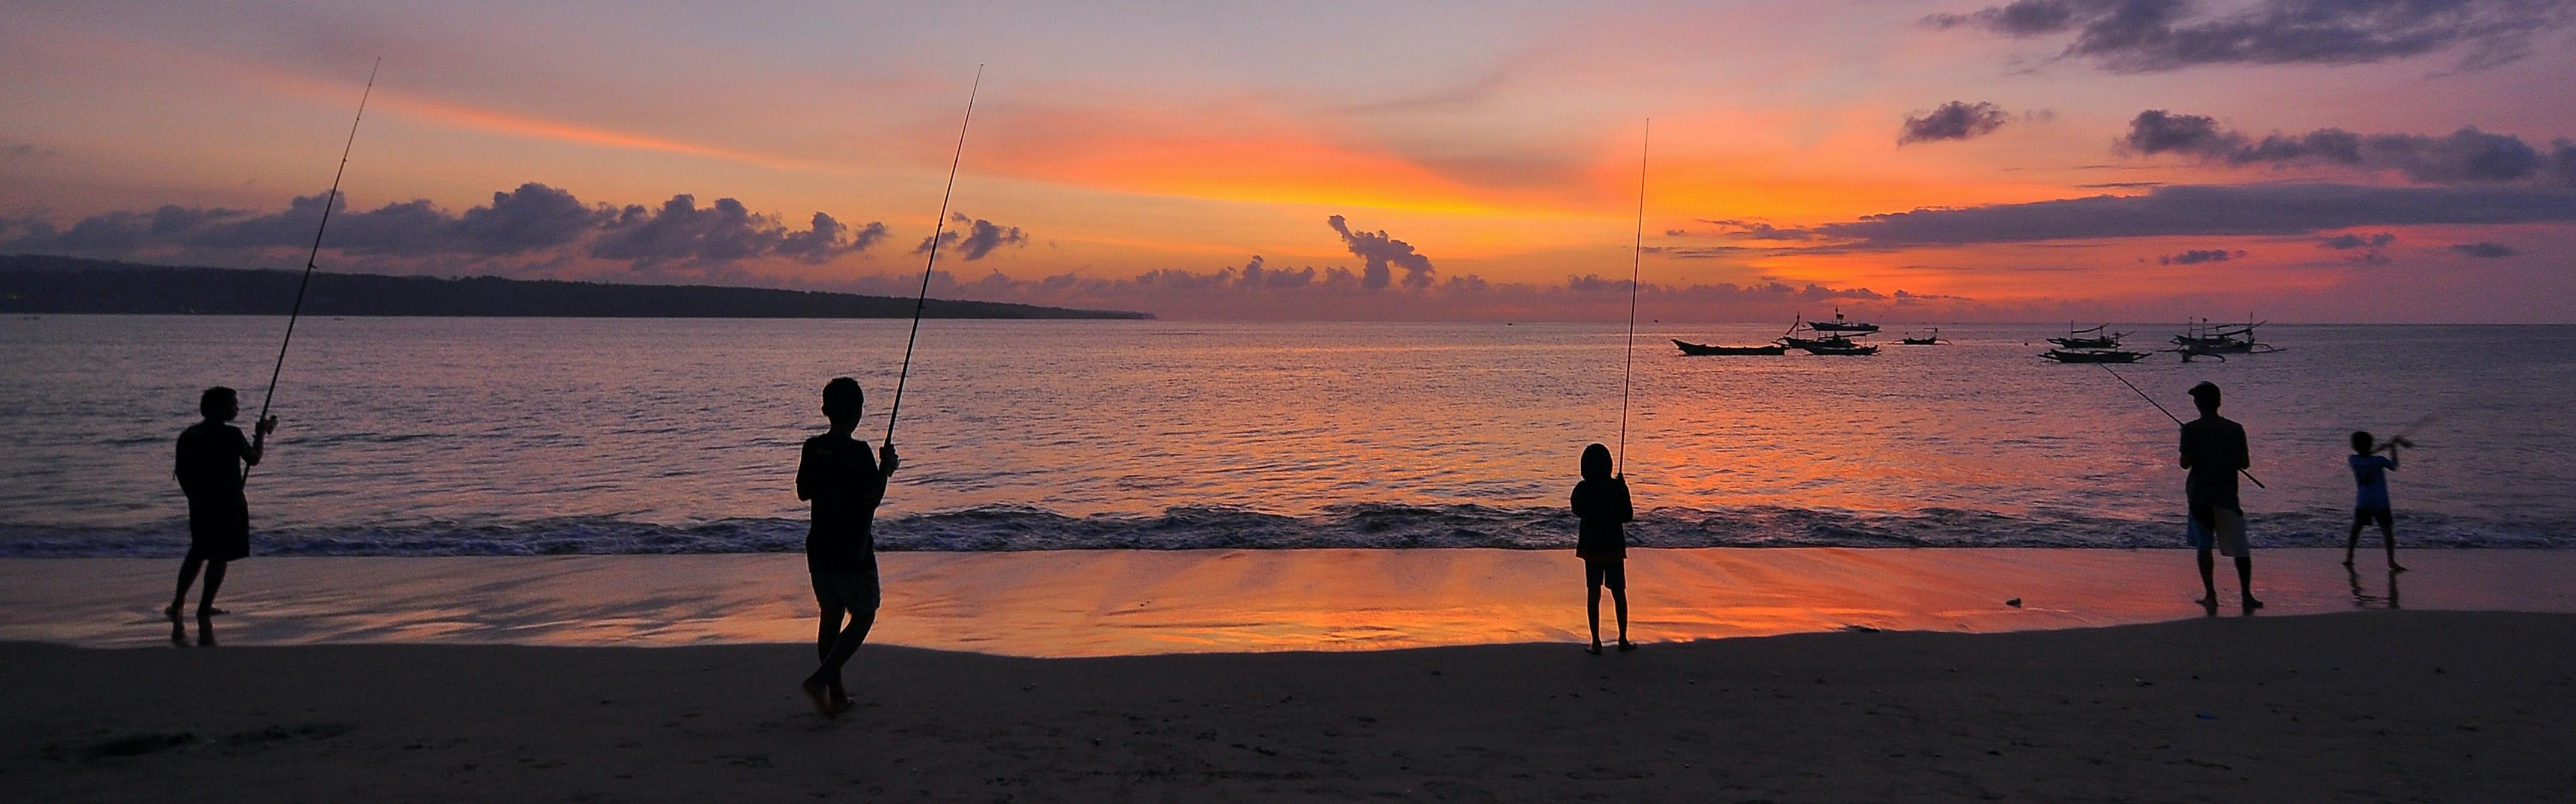 Several people fish from the shore of the ocean as the sun sets. 